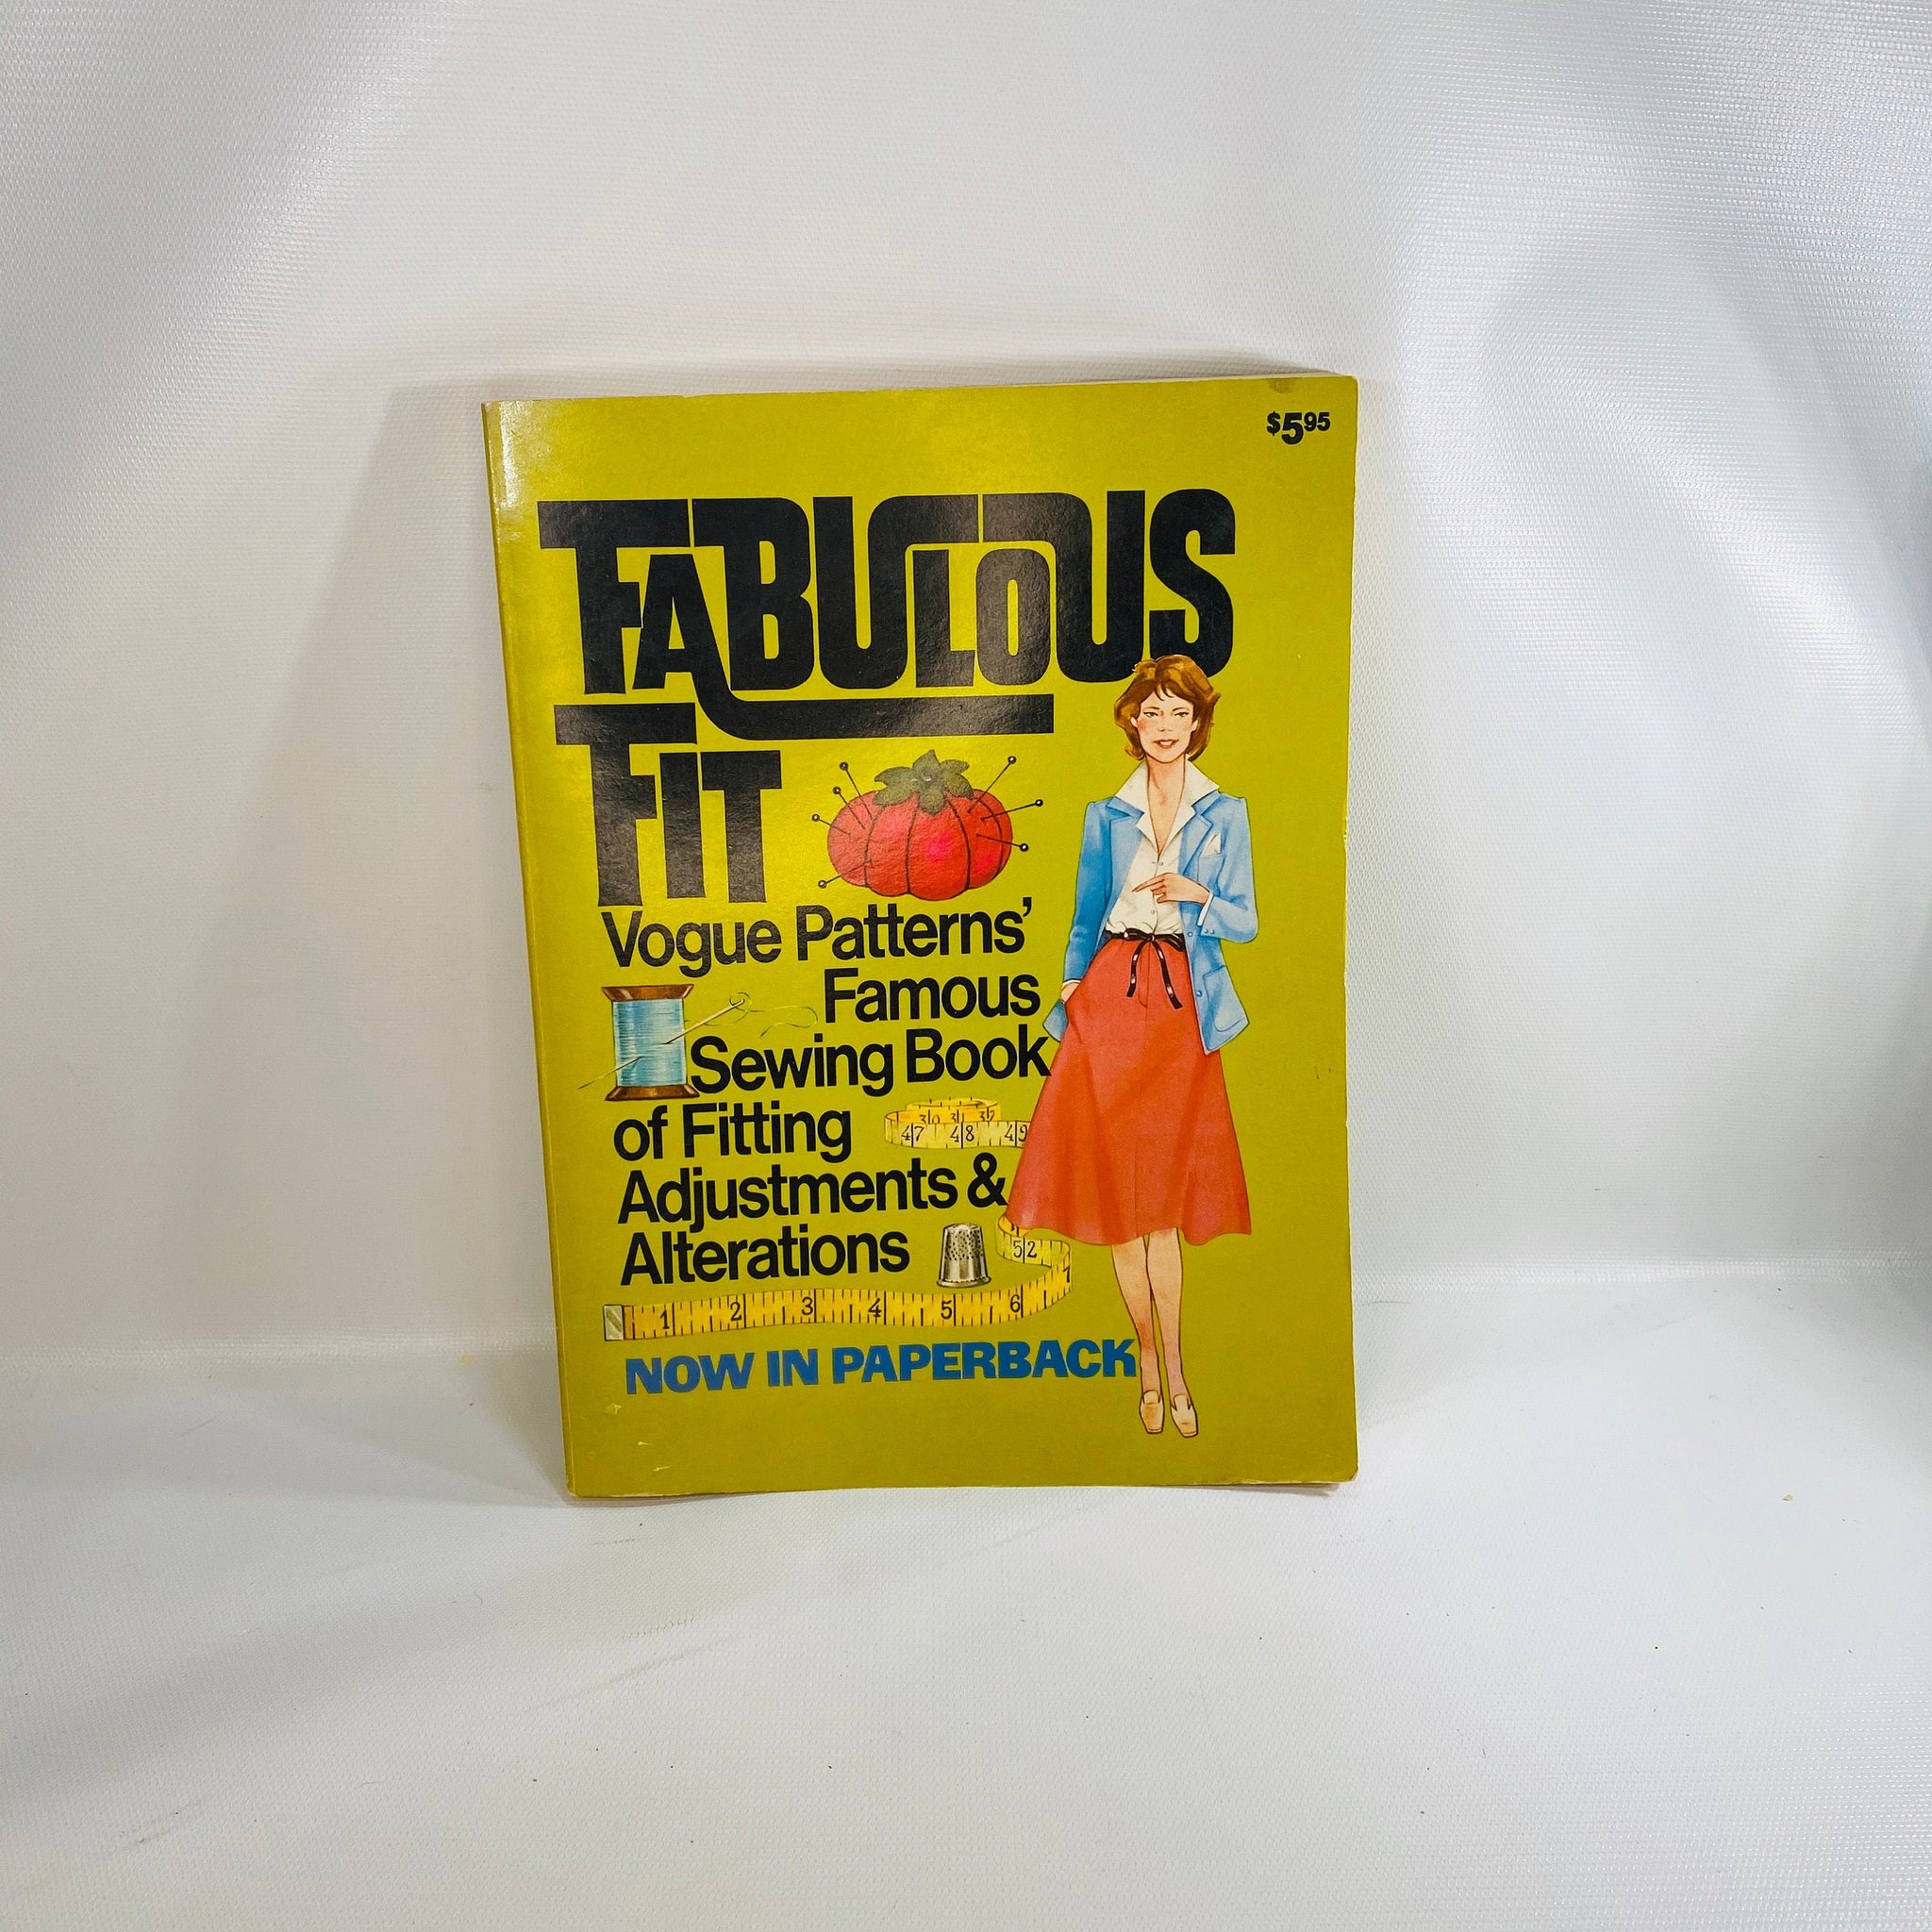 Fabulous Fit Vogue Patterns Famous Sewing Book by Patricia Perry